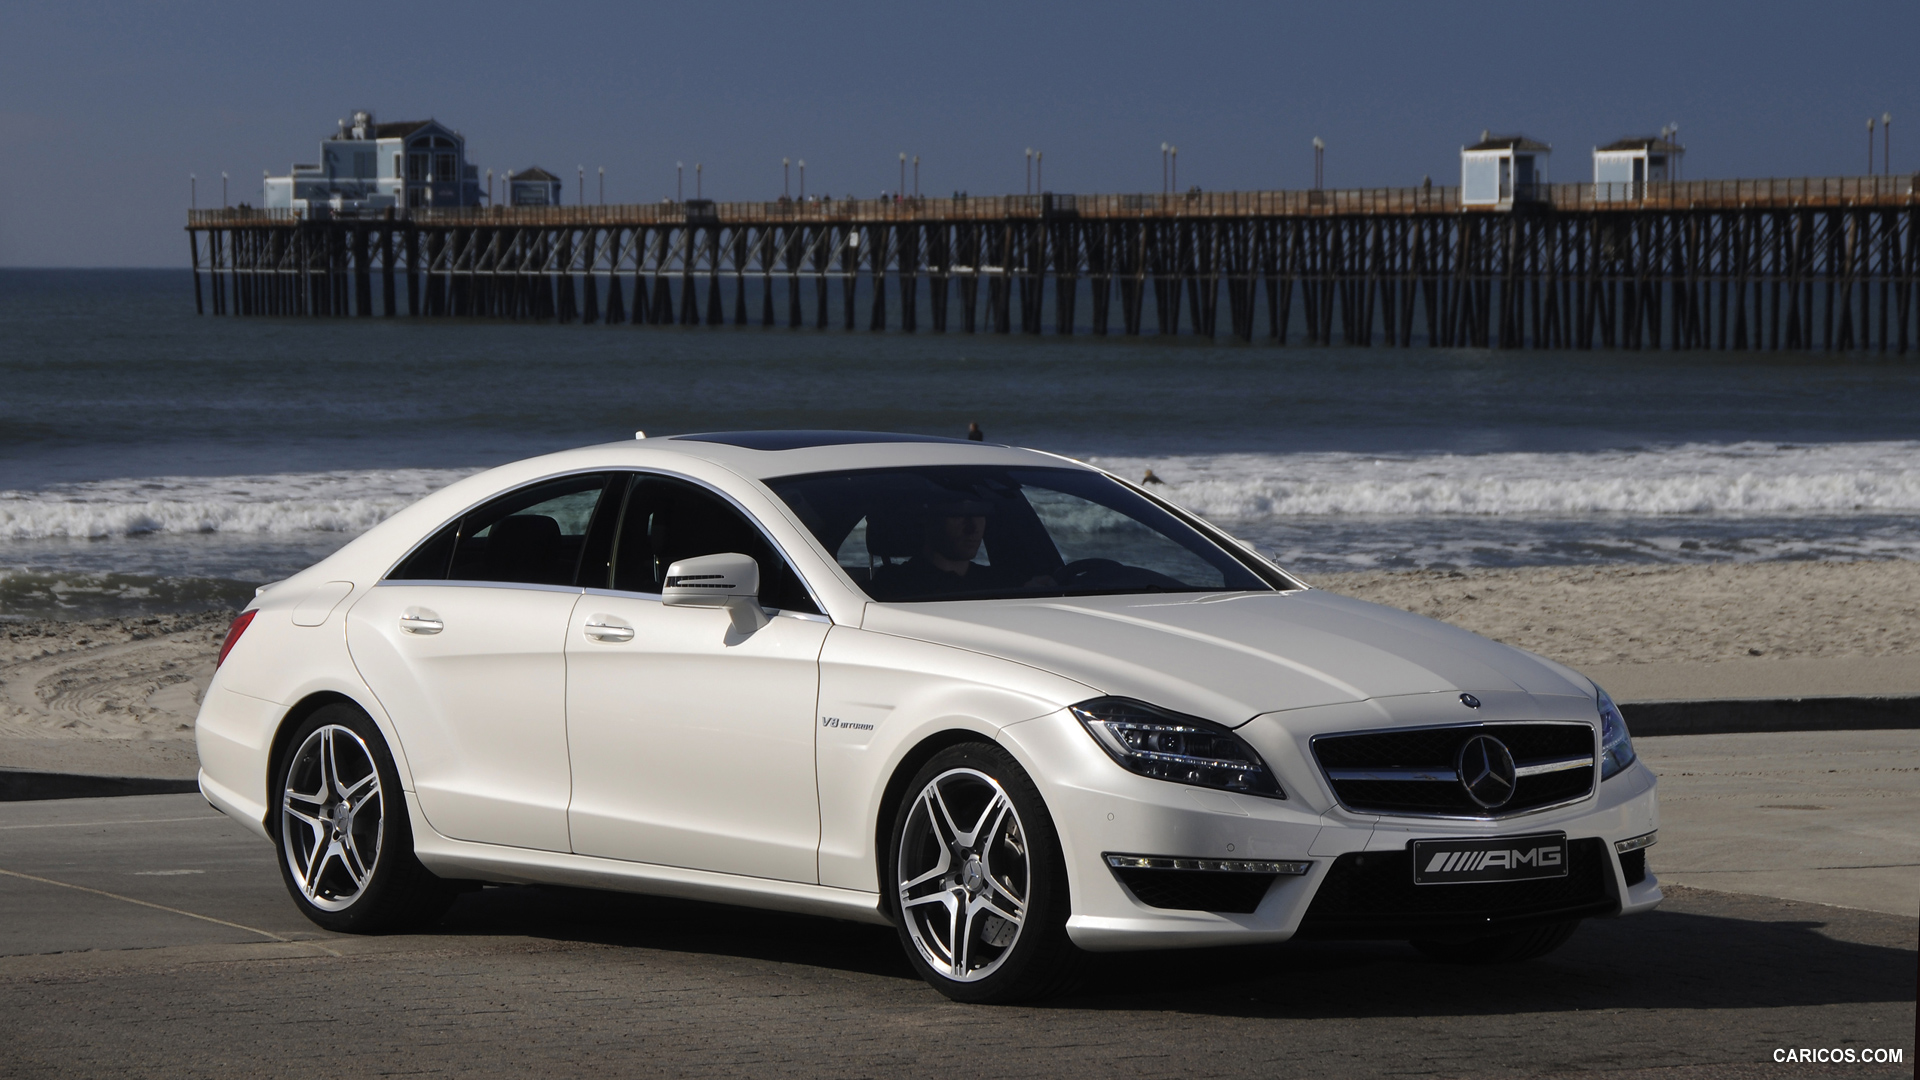 Mercedes-Benz CLS63 AMG (2012) US-Version - Diamond White - Side, #16 of 100